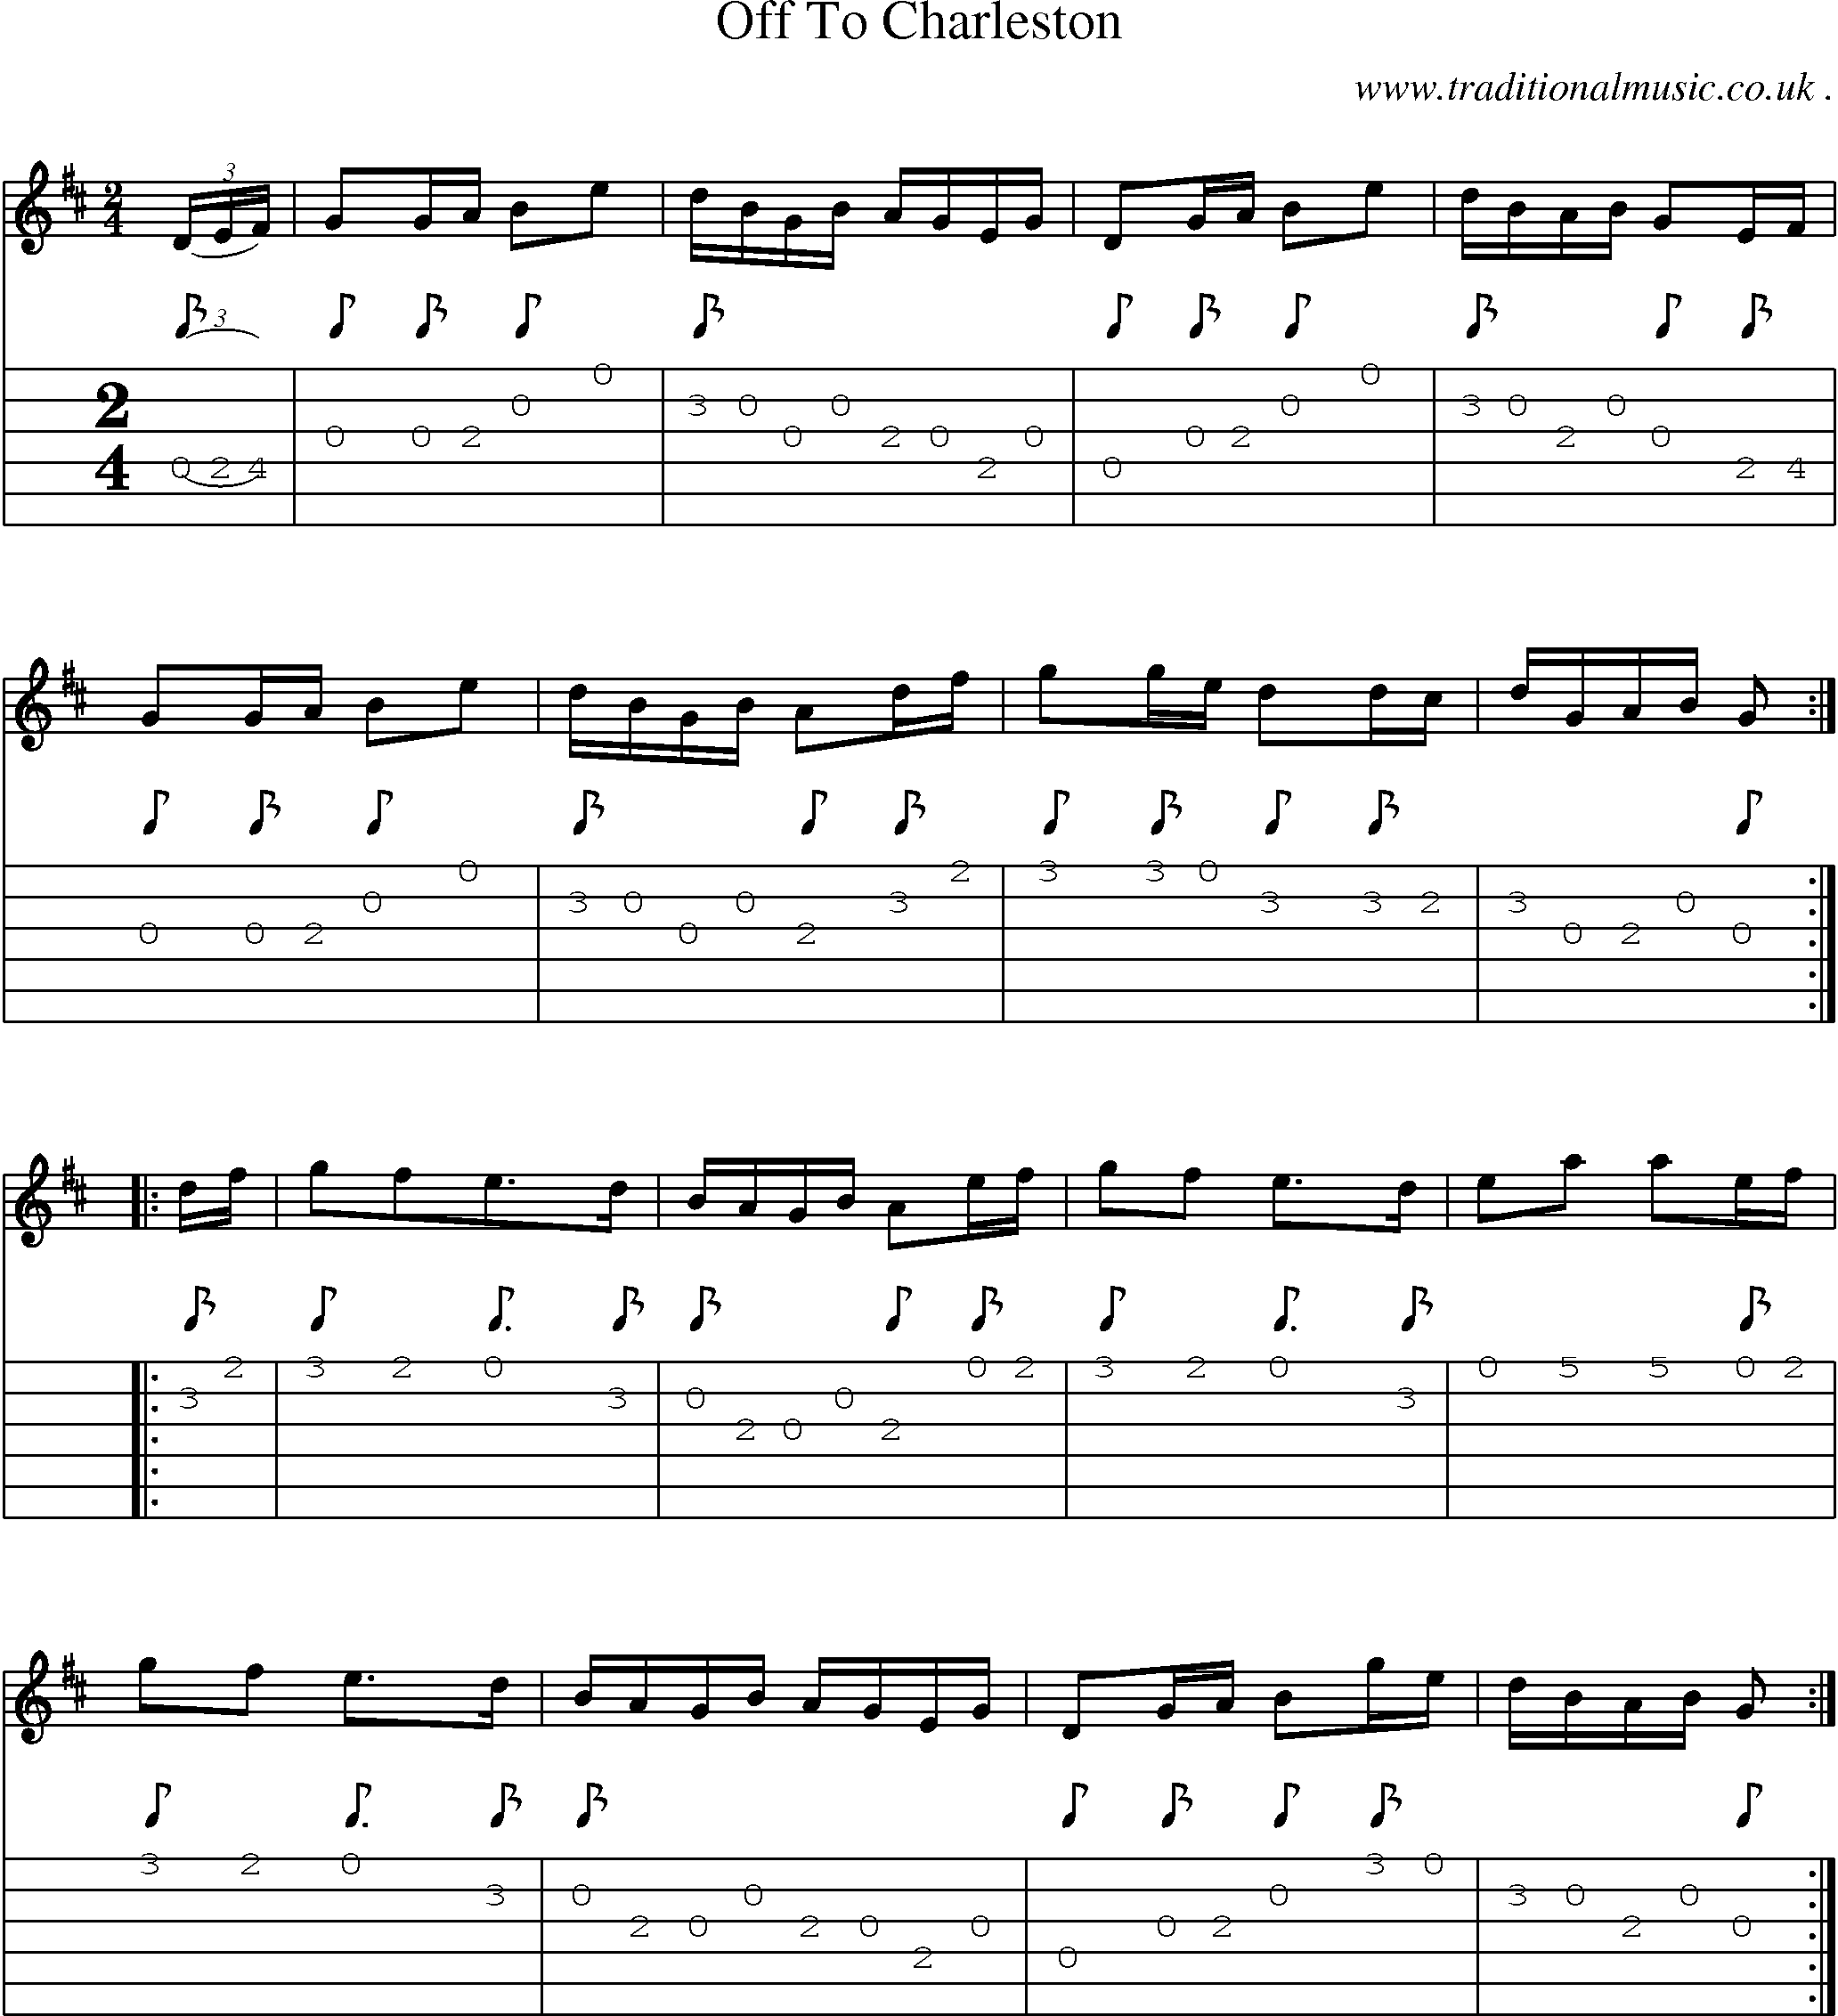 Music Score and Guitar Tabs for Off To Charleston